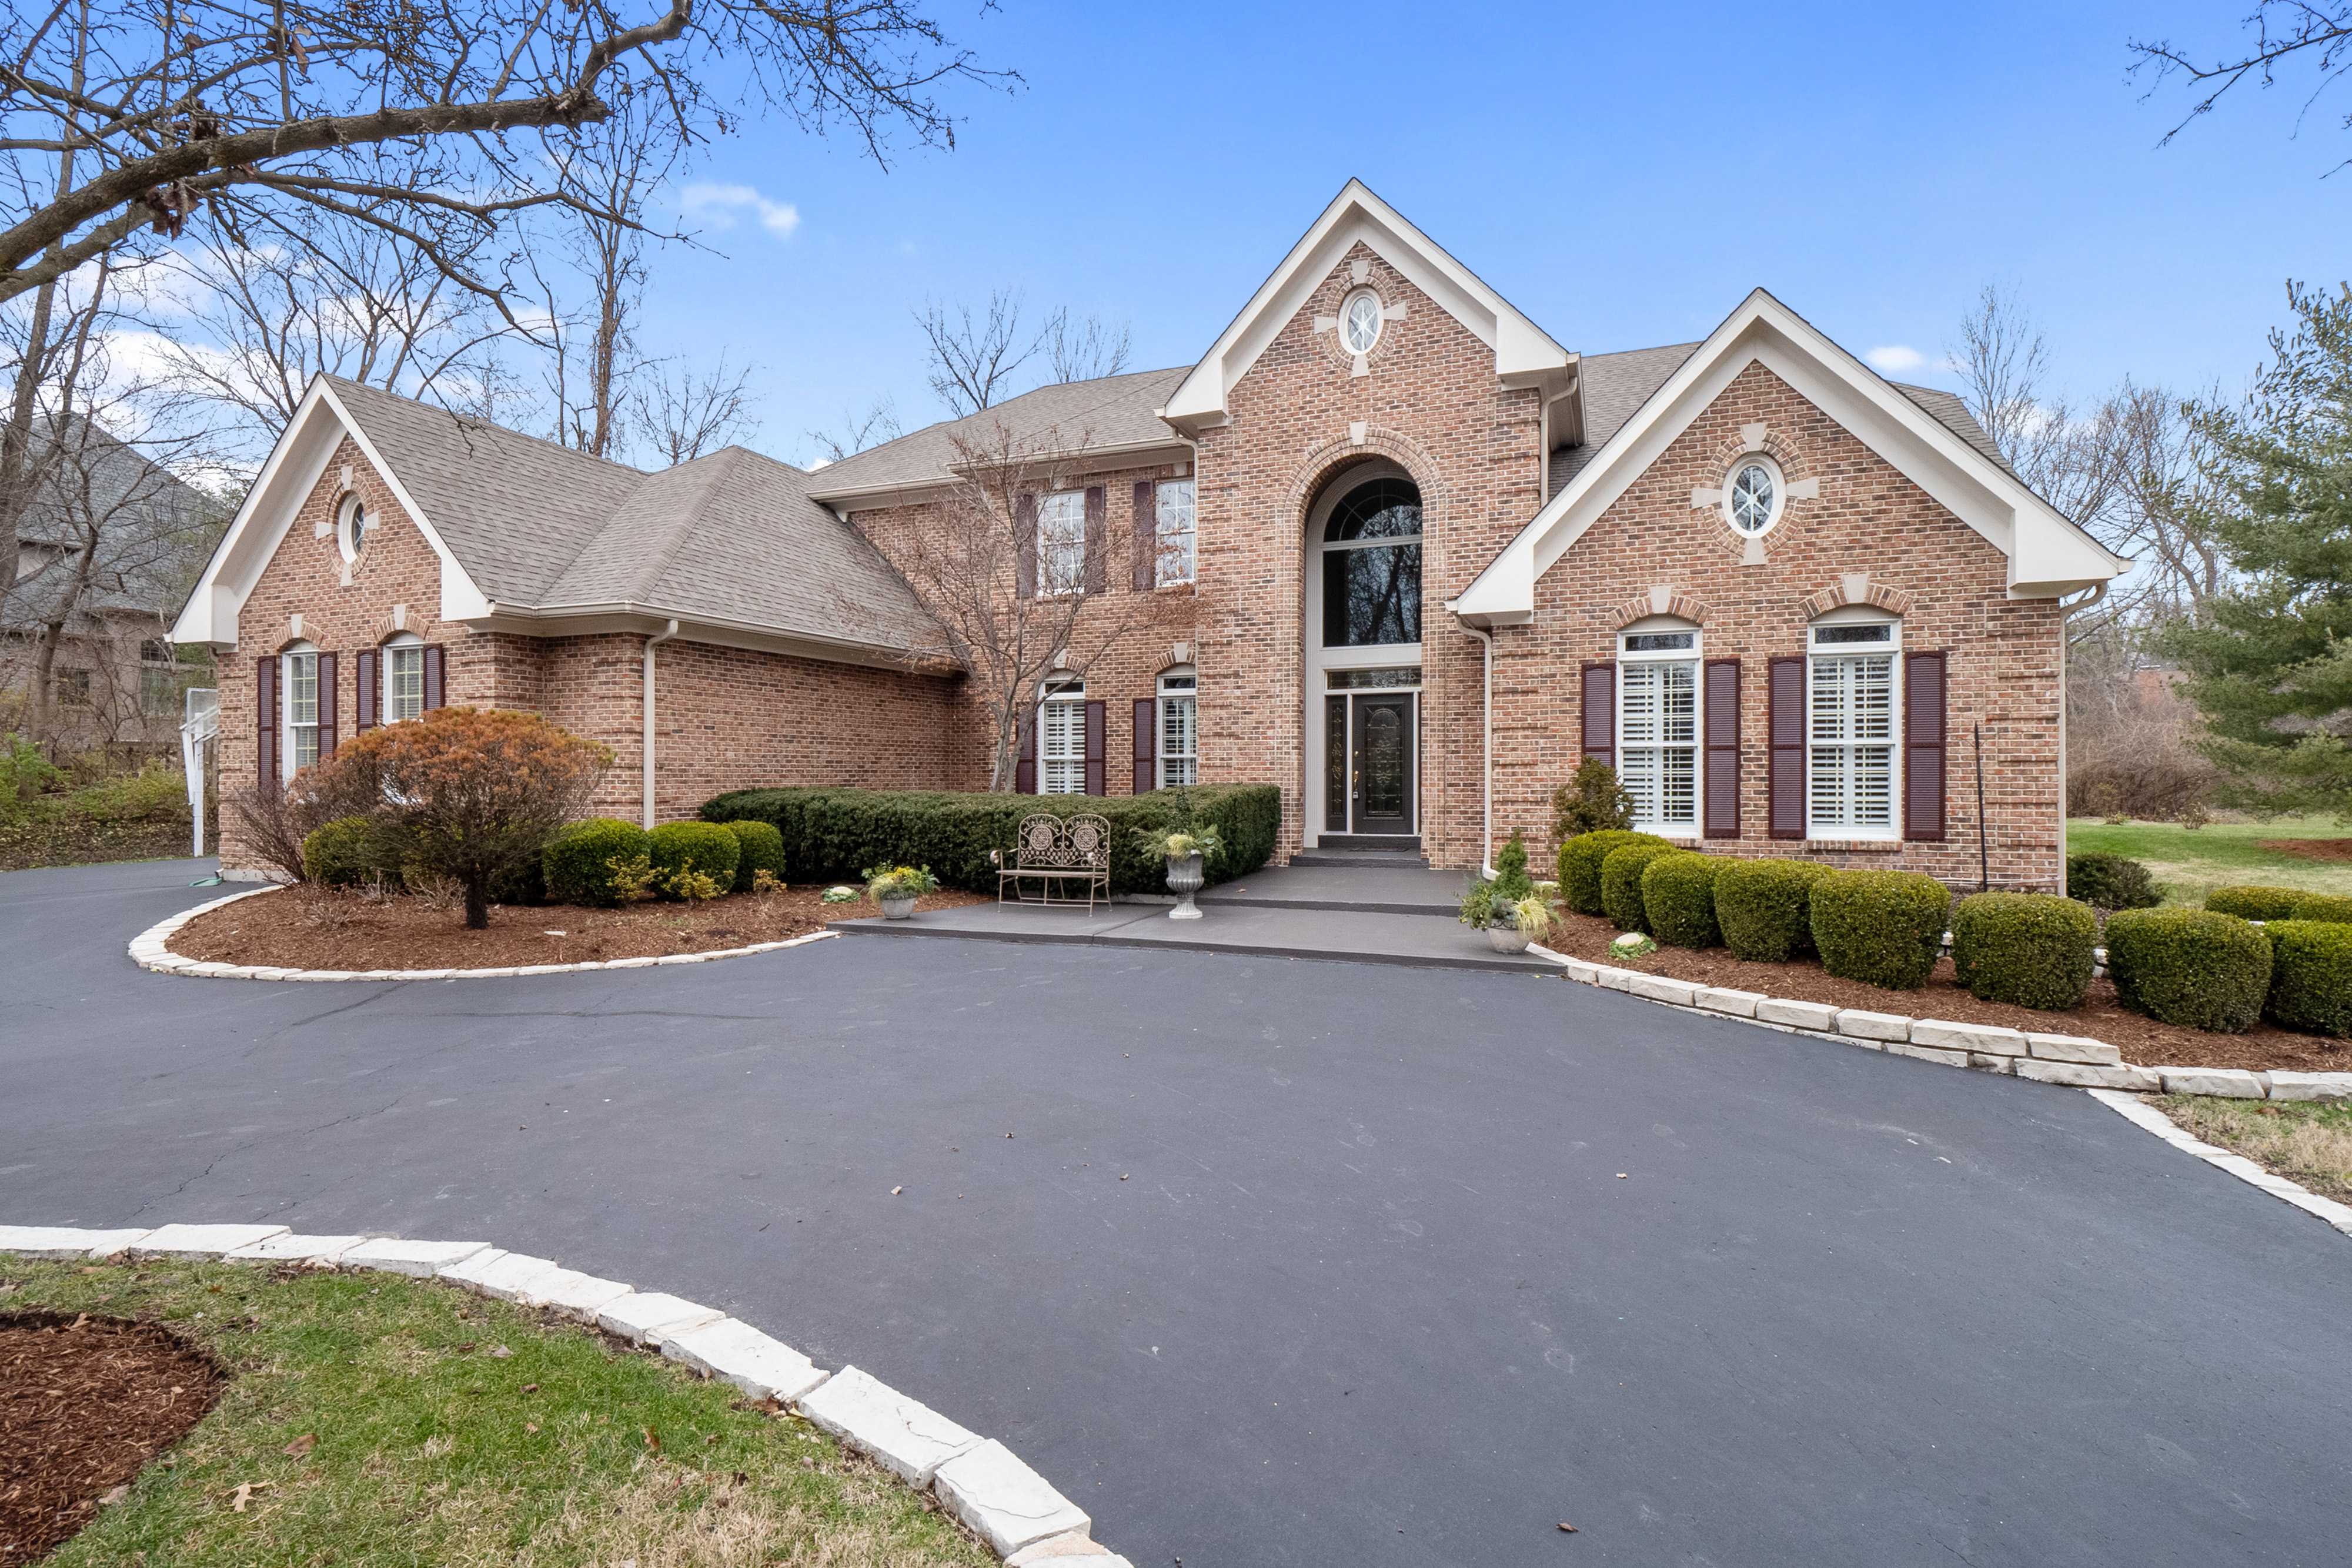 Newer Construction in Creve Coeur